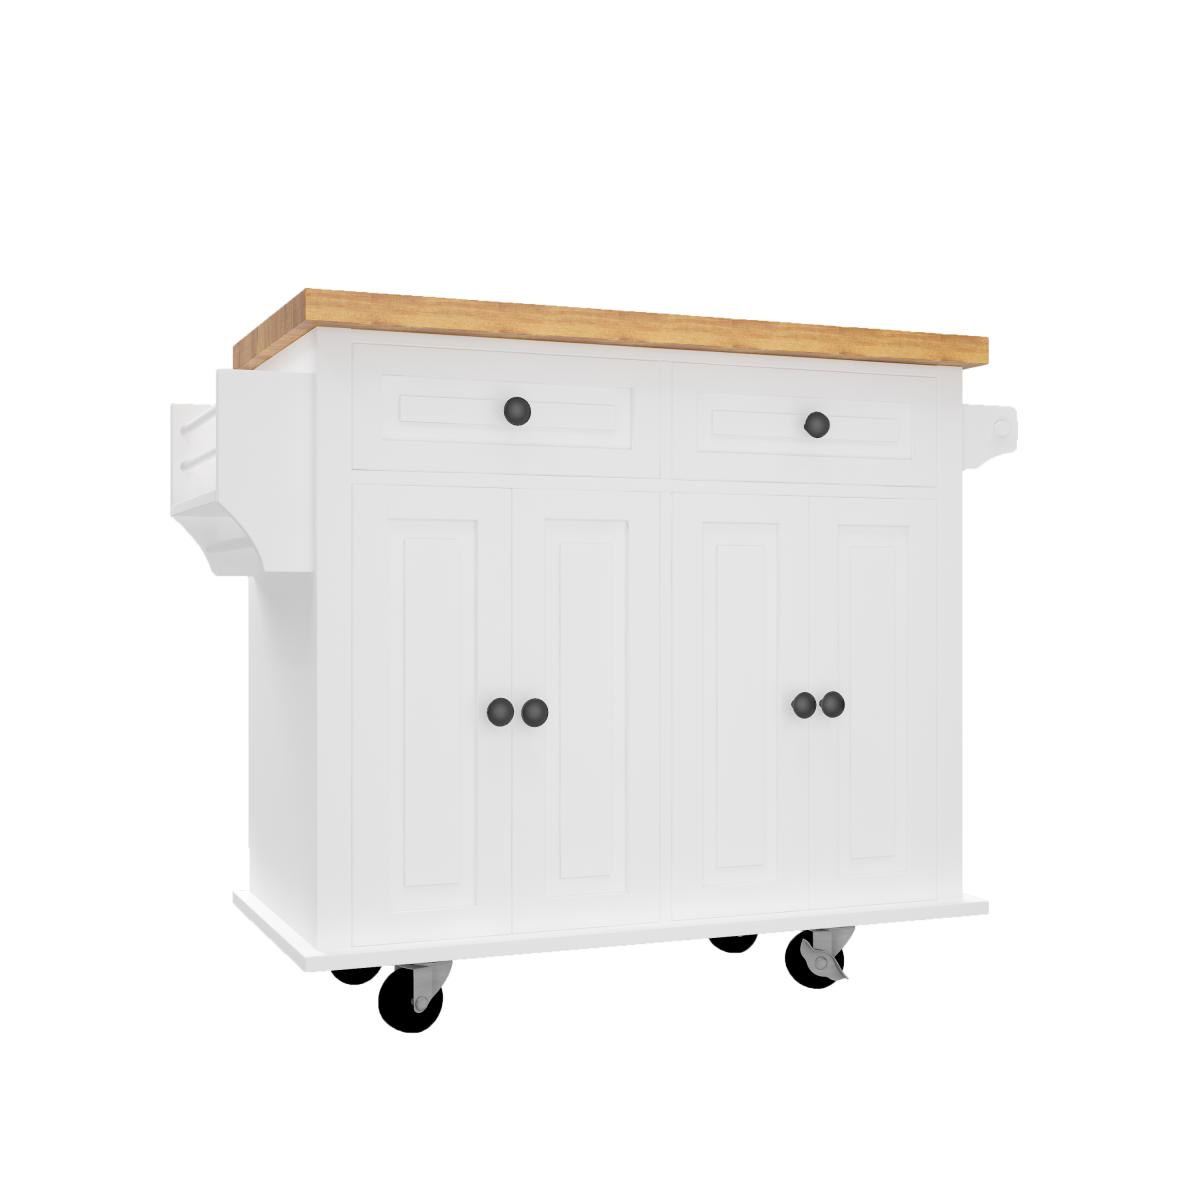 Kitchen Island Cart with Two Storage Cabinets and Two Locking Wheels,43.31 Inch Width,4 Door Cabinet and Two Drawers,Spice Rack, Towel Rack(White)